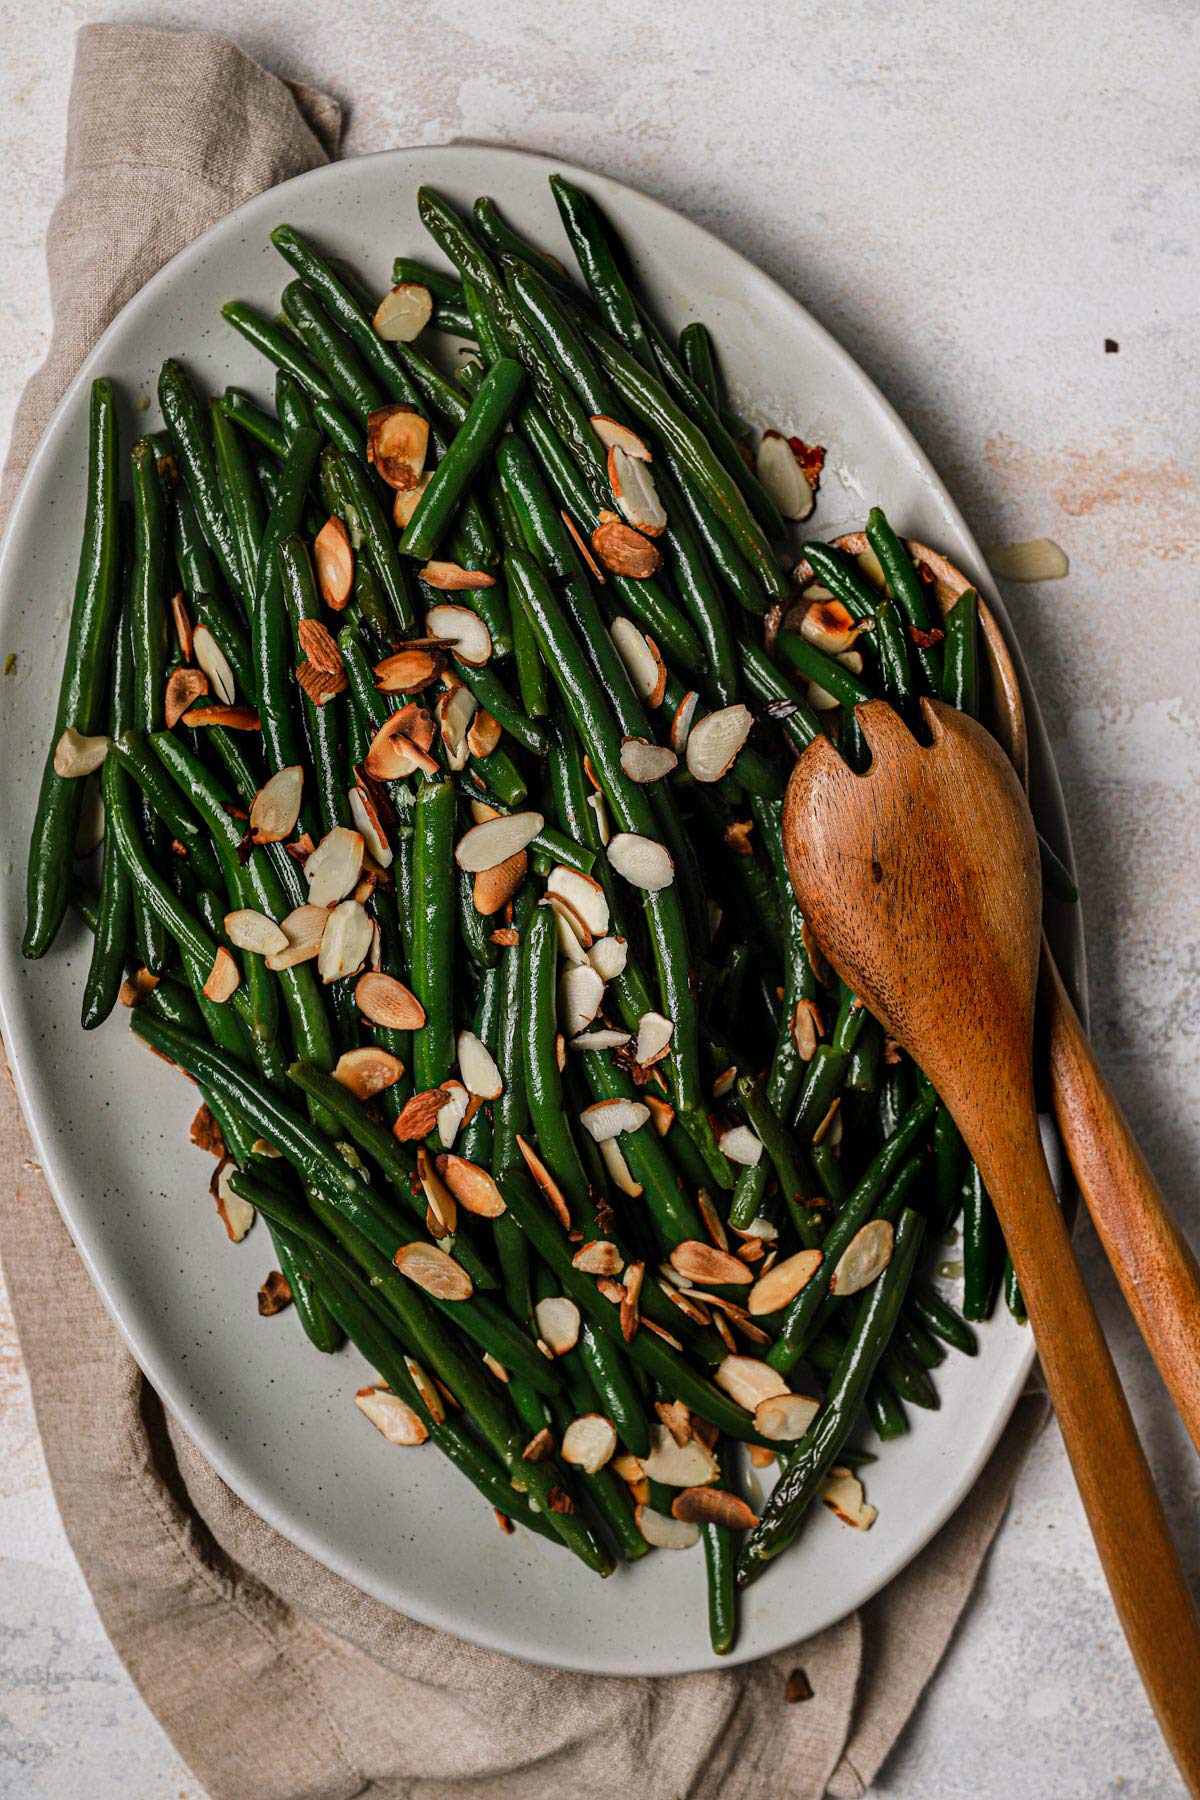 Green beans tossed with toasted sliced almonds in a serving dish with wooden spoons.